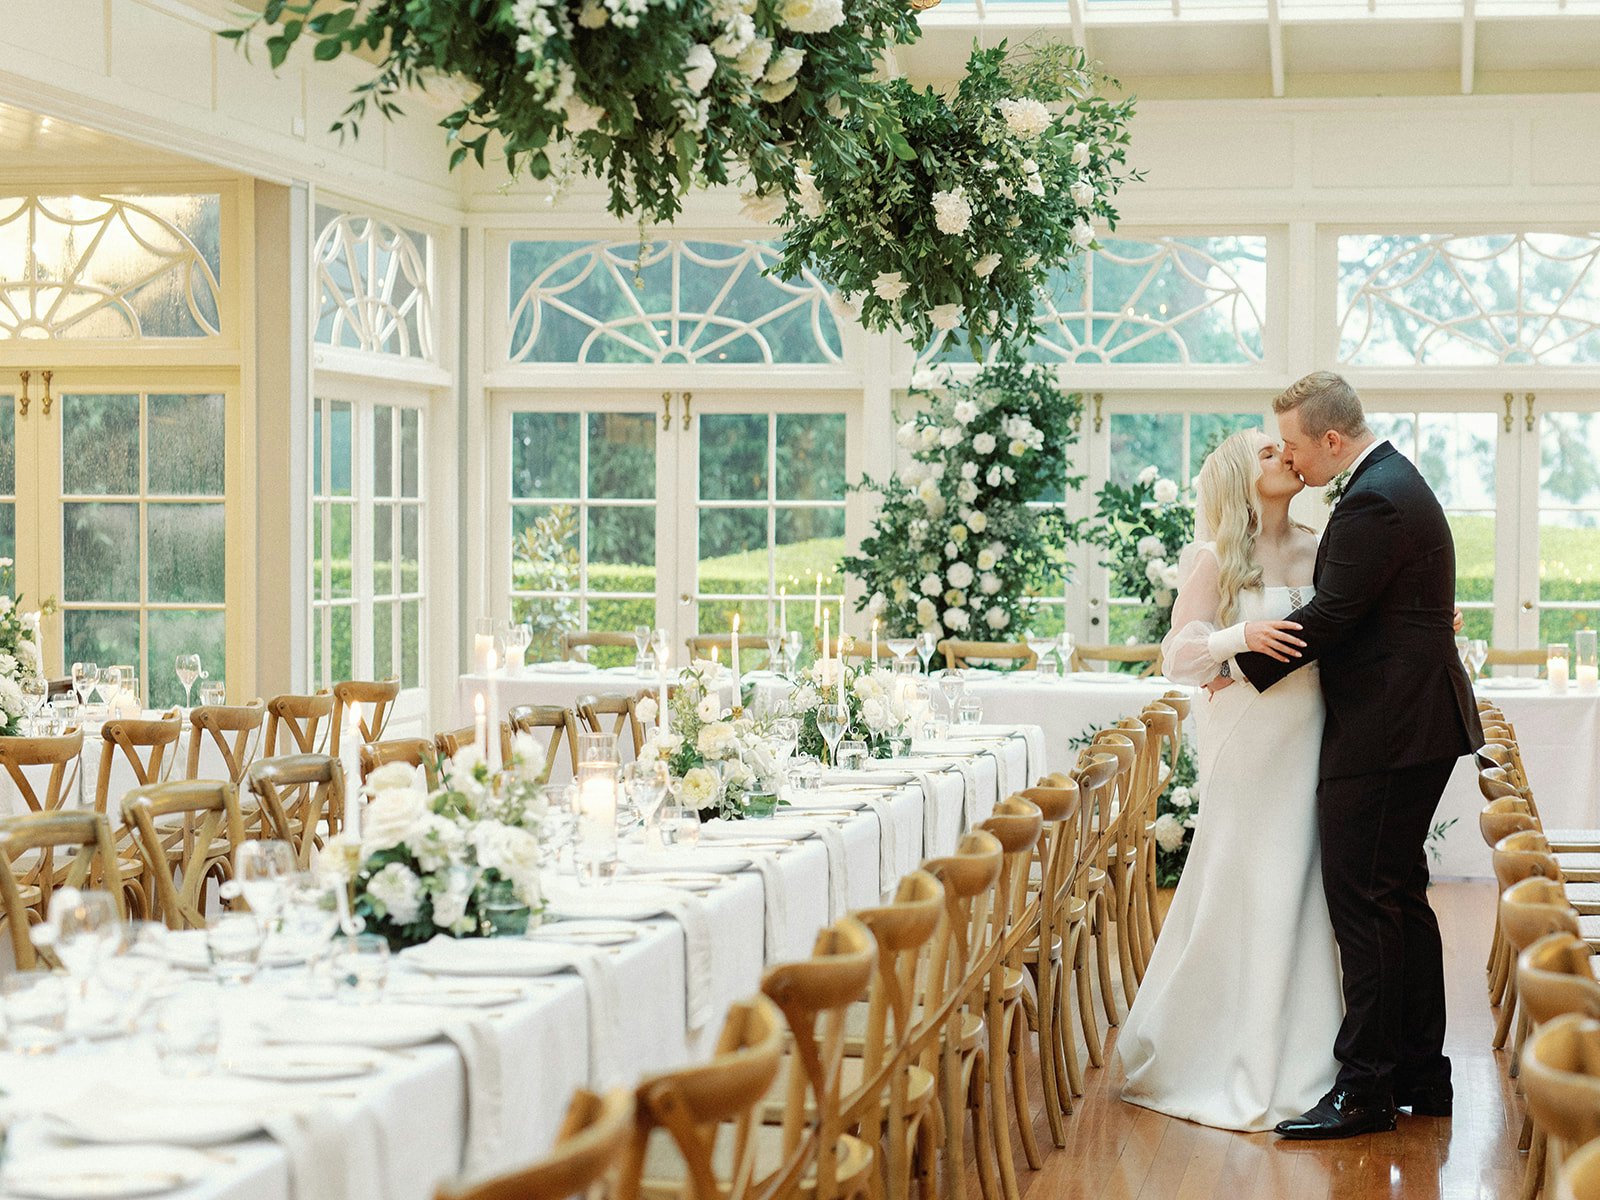 Bride and groom kissing under hanging flowers